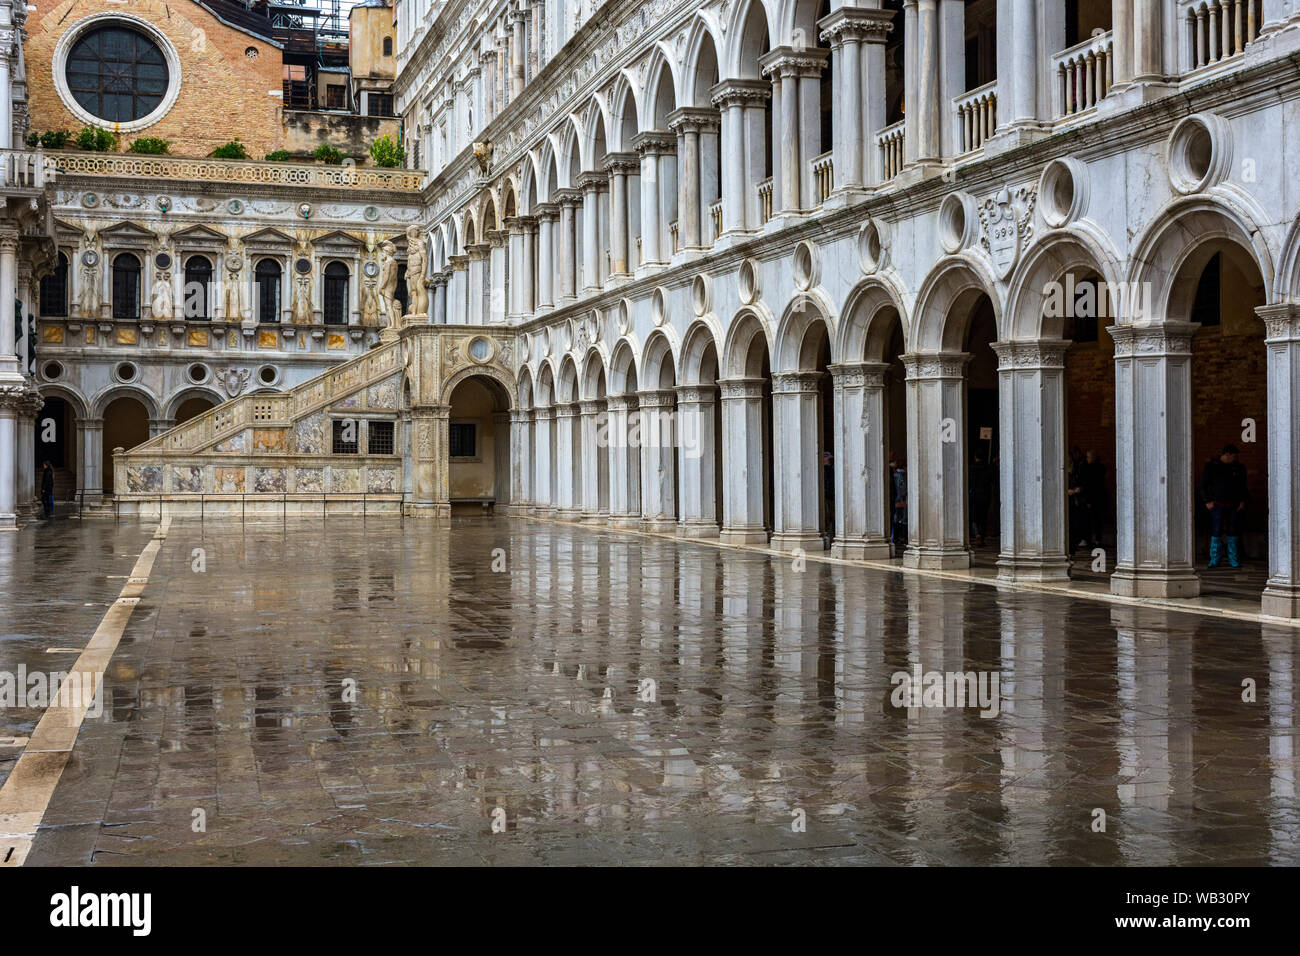 The Giant's Staircase (Scala dei Giganti) and arcade in the courtyard of the Doge's Palace (Palazzo Ducale), Venice, Italy Stock Photo